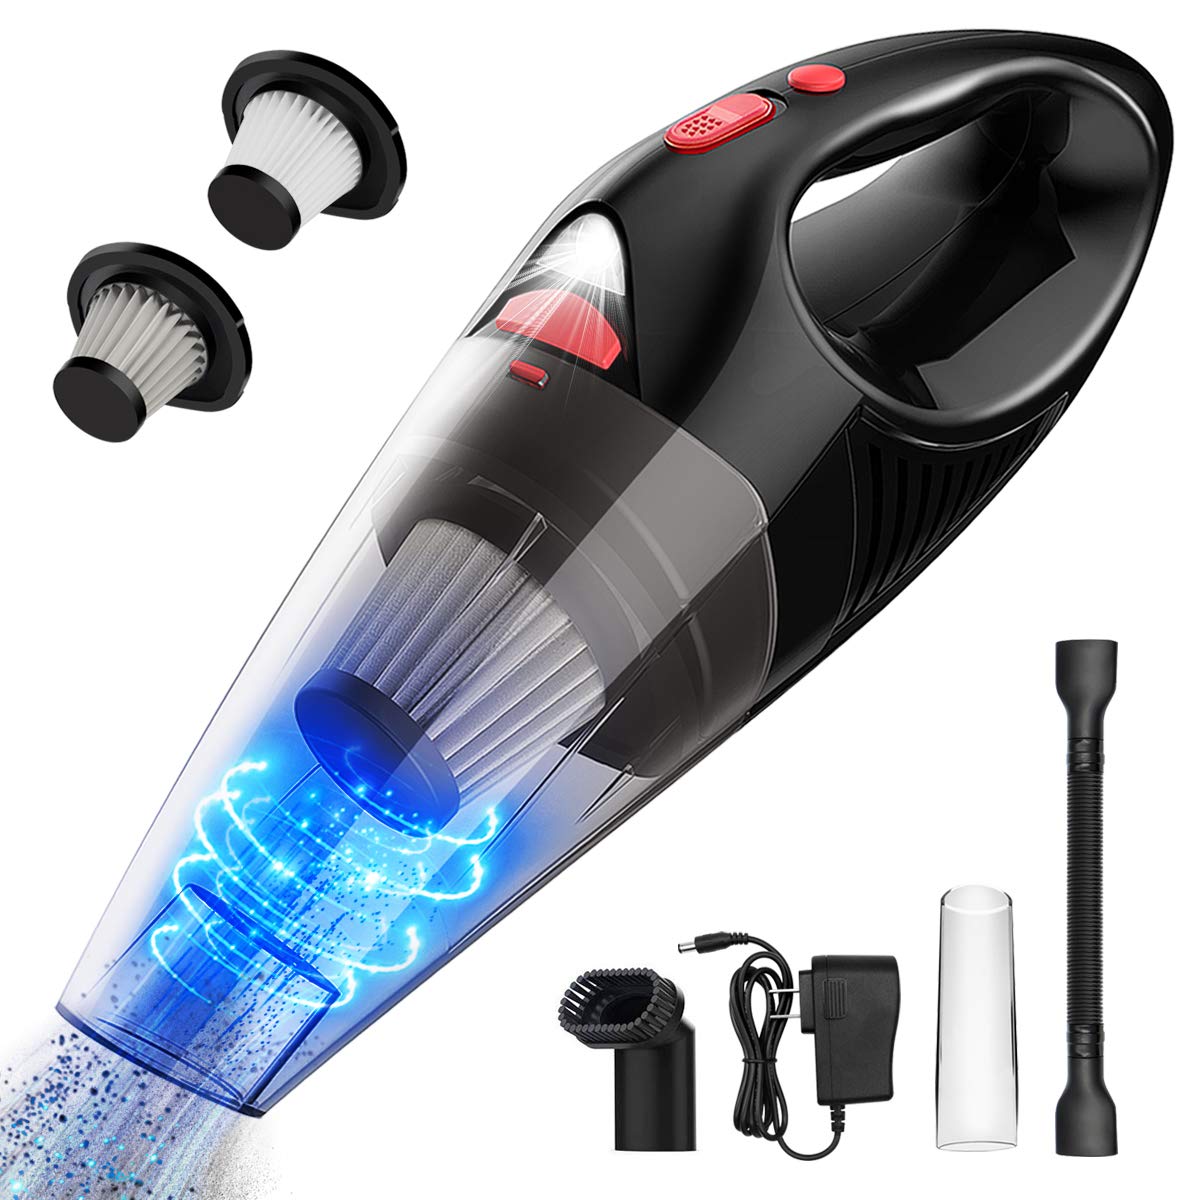 Book Cover Simonseason Handheld Vacuum Cleaner 6.5KPA Cordless Car Vacuum Cleaner Portable&Lightweight Small Hand Held Vacuum Cleaner Rechargeable Hand Vac with LED Light for Home Pets Hair Cleaning Wet&Dry Use